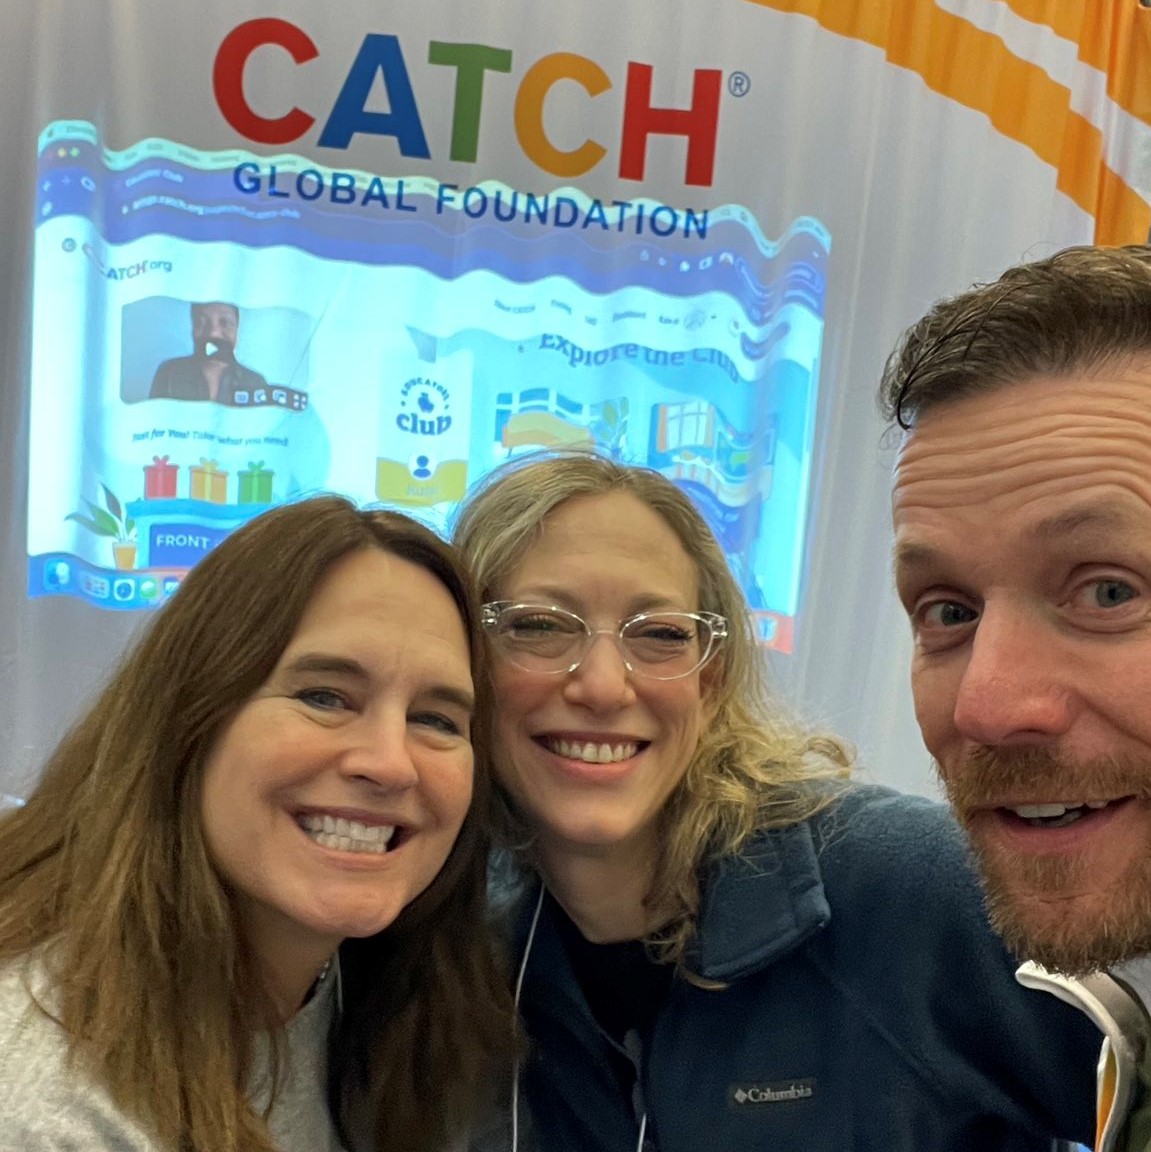 We reflect on our time at #SHAPECleveland with gratitude for our fellow leaders in health and physical education who are making a difference in school communities, along with hope for leaders of the future! Thank you to everyone who connected with us at our booth and attended our…